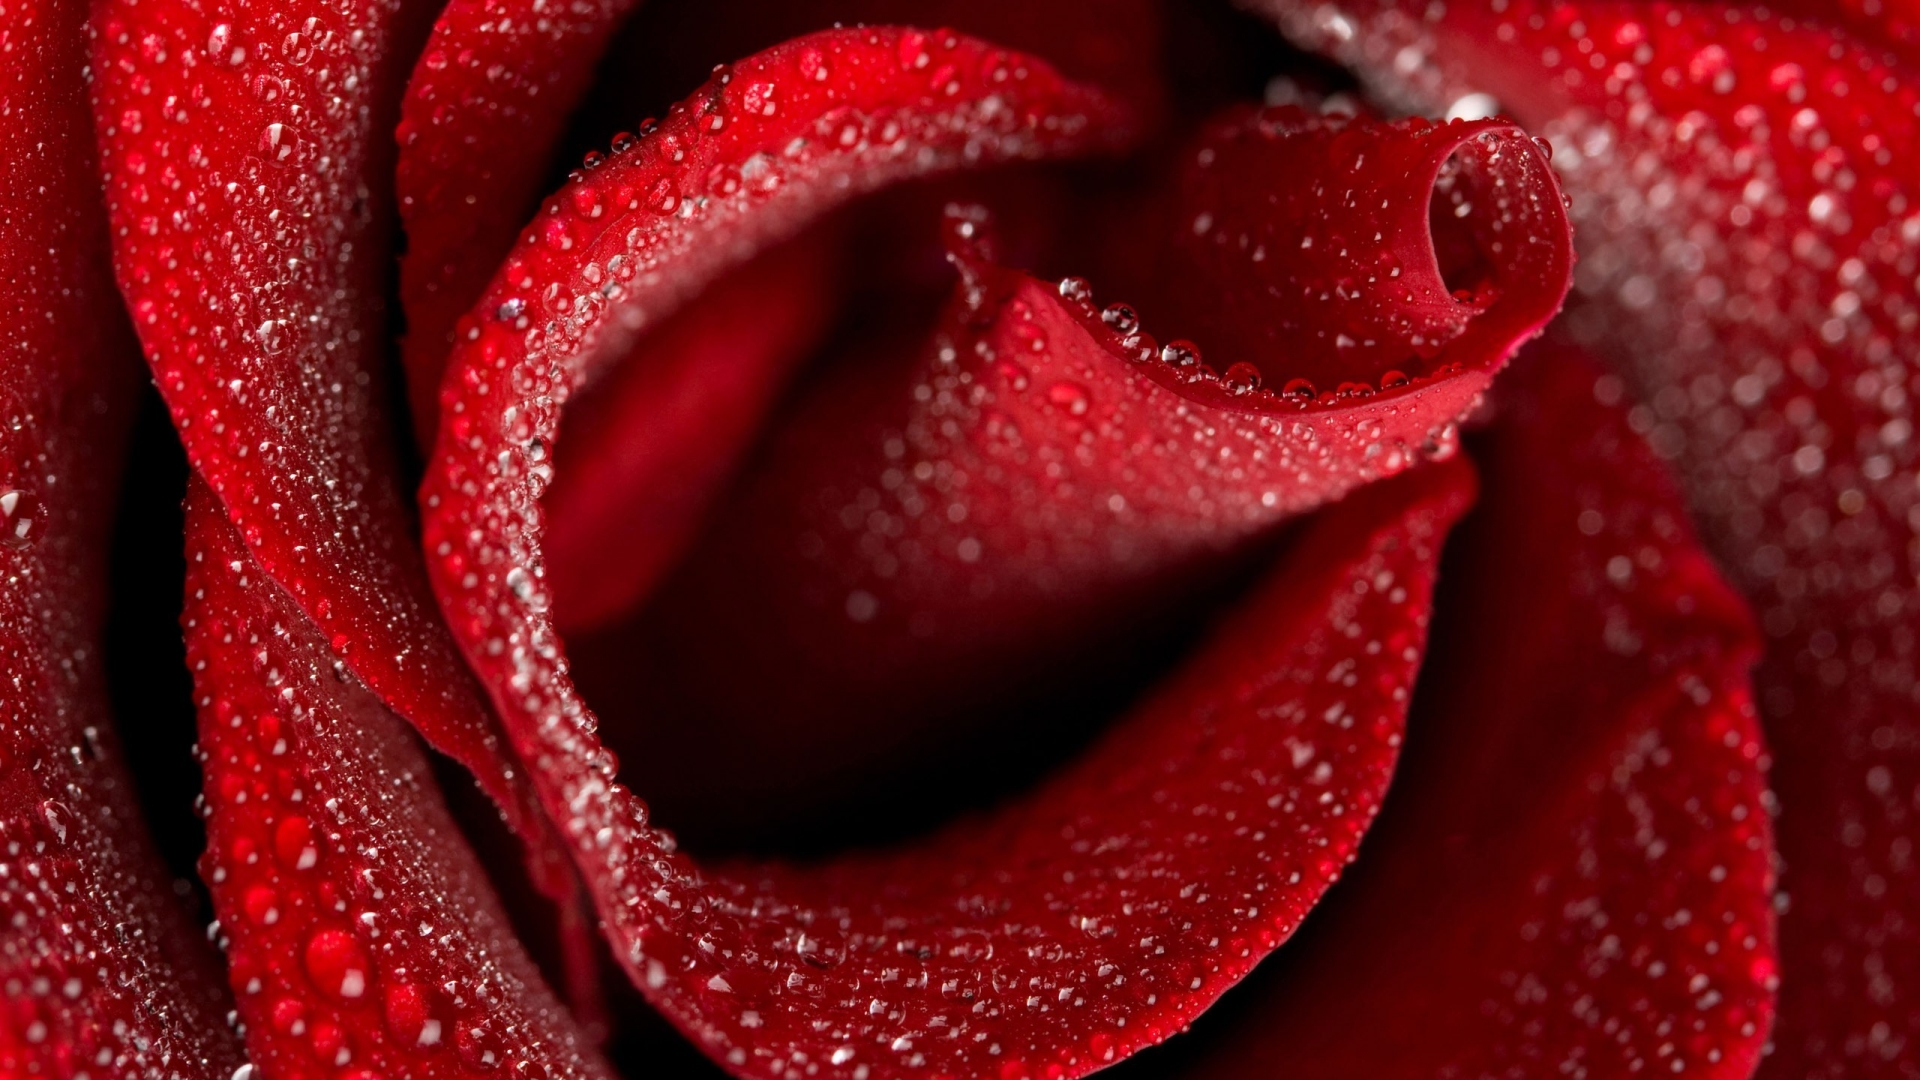 Beautiful Rose for 1920 x 1080 HDTV 1080p resolution